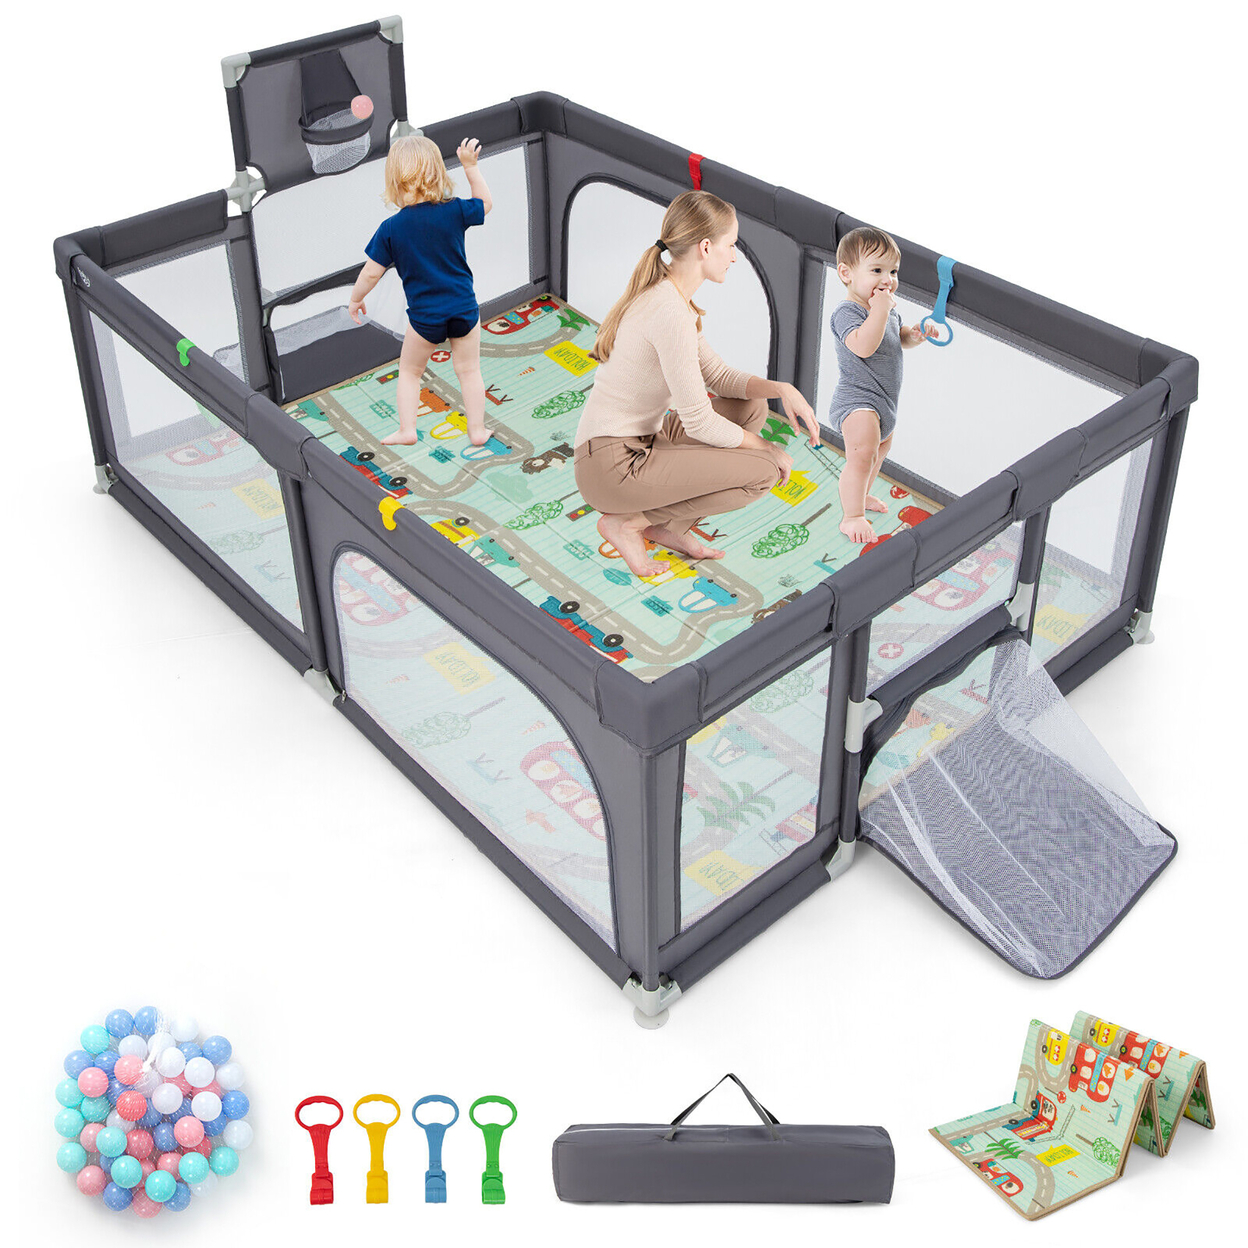 Baby Playpen Large Safe Play Yard Fun Activity Center With Mat & Soccer Nets - Light Grey